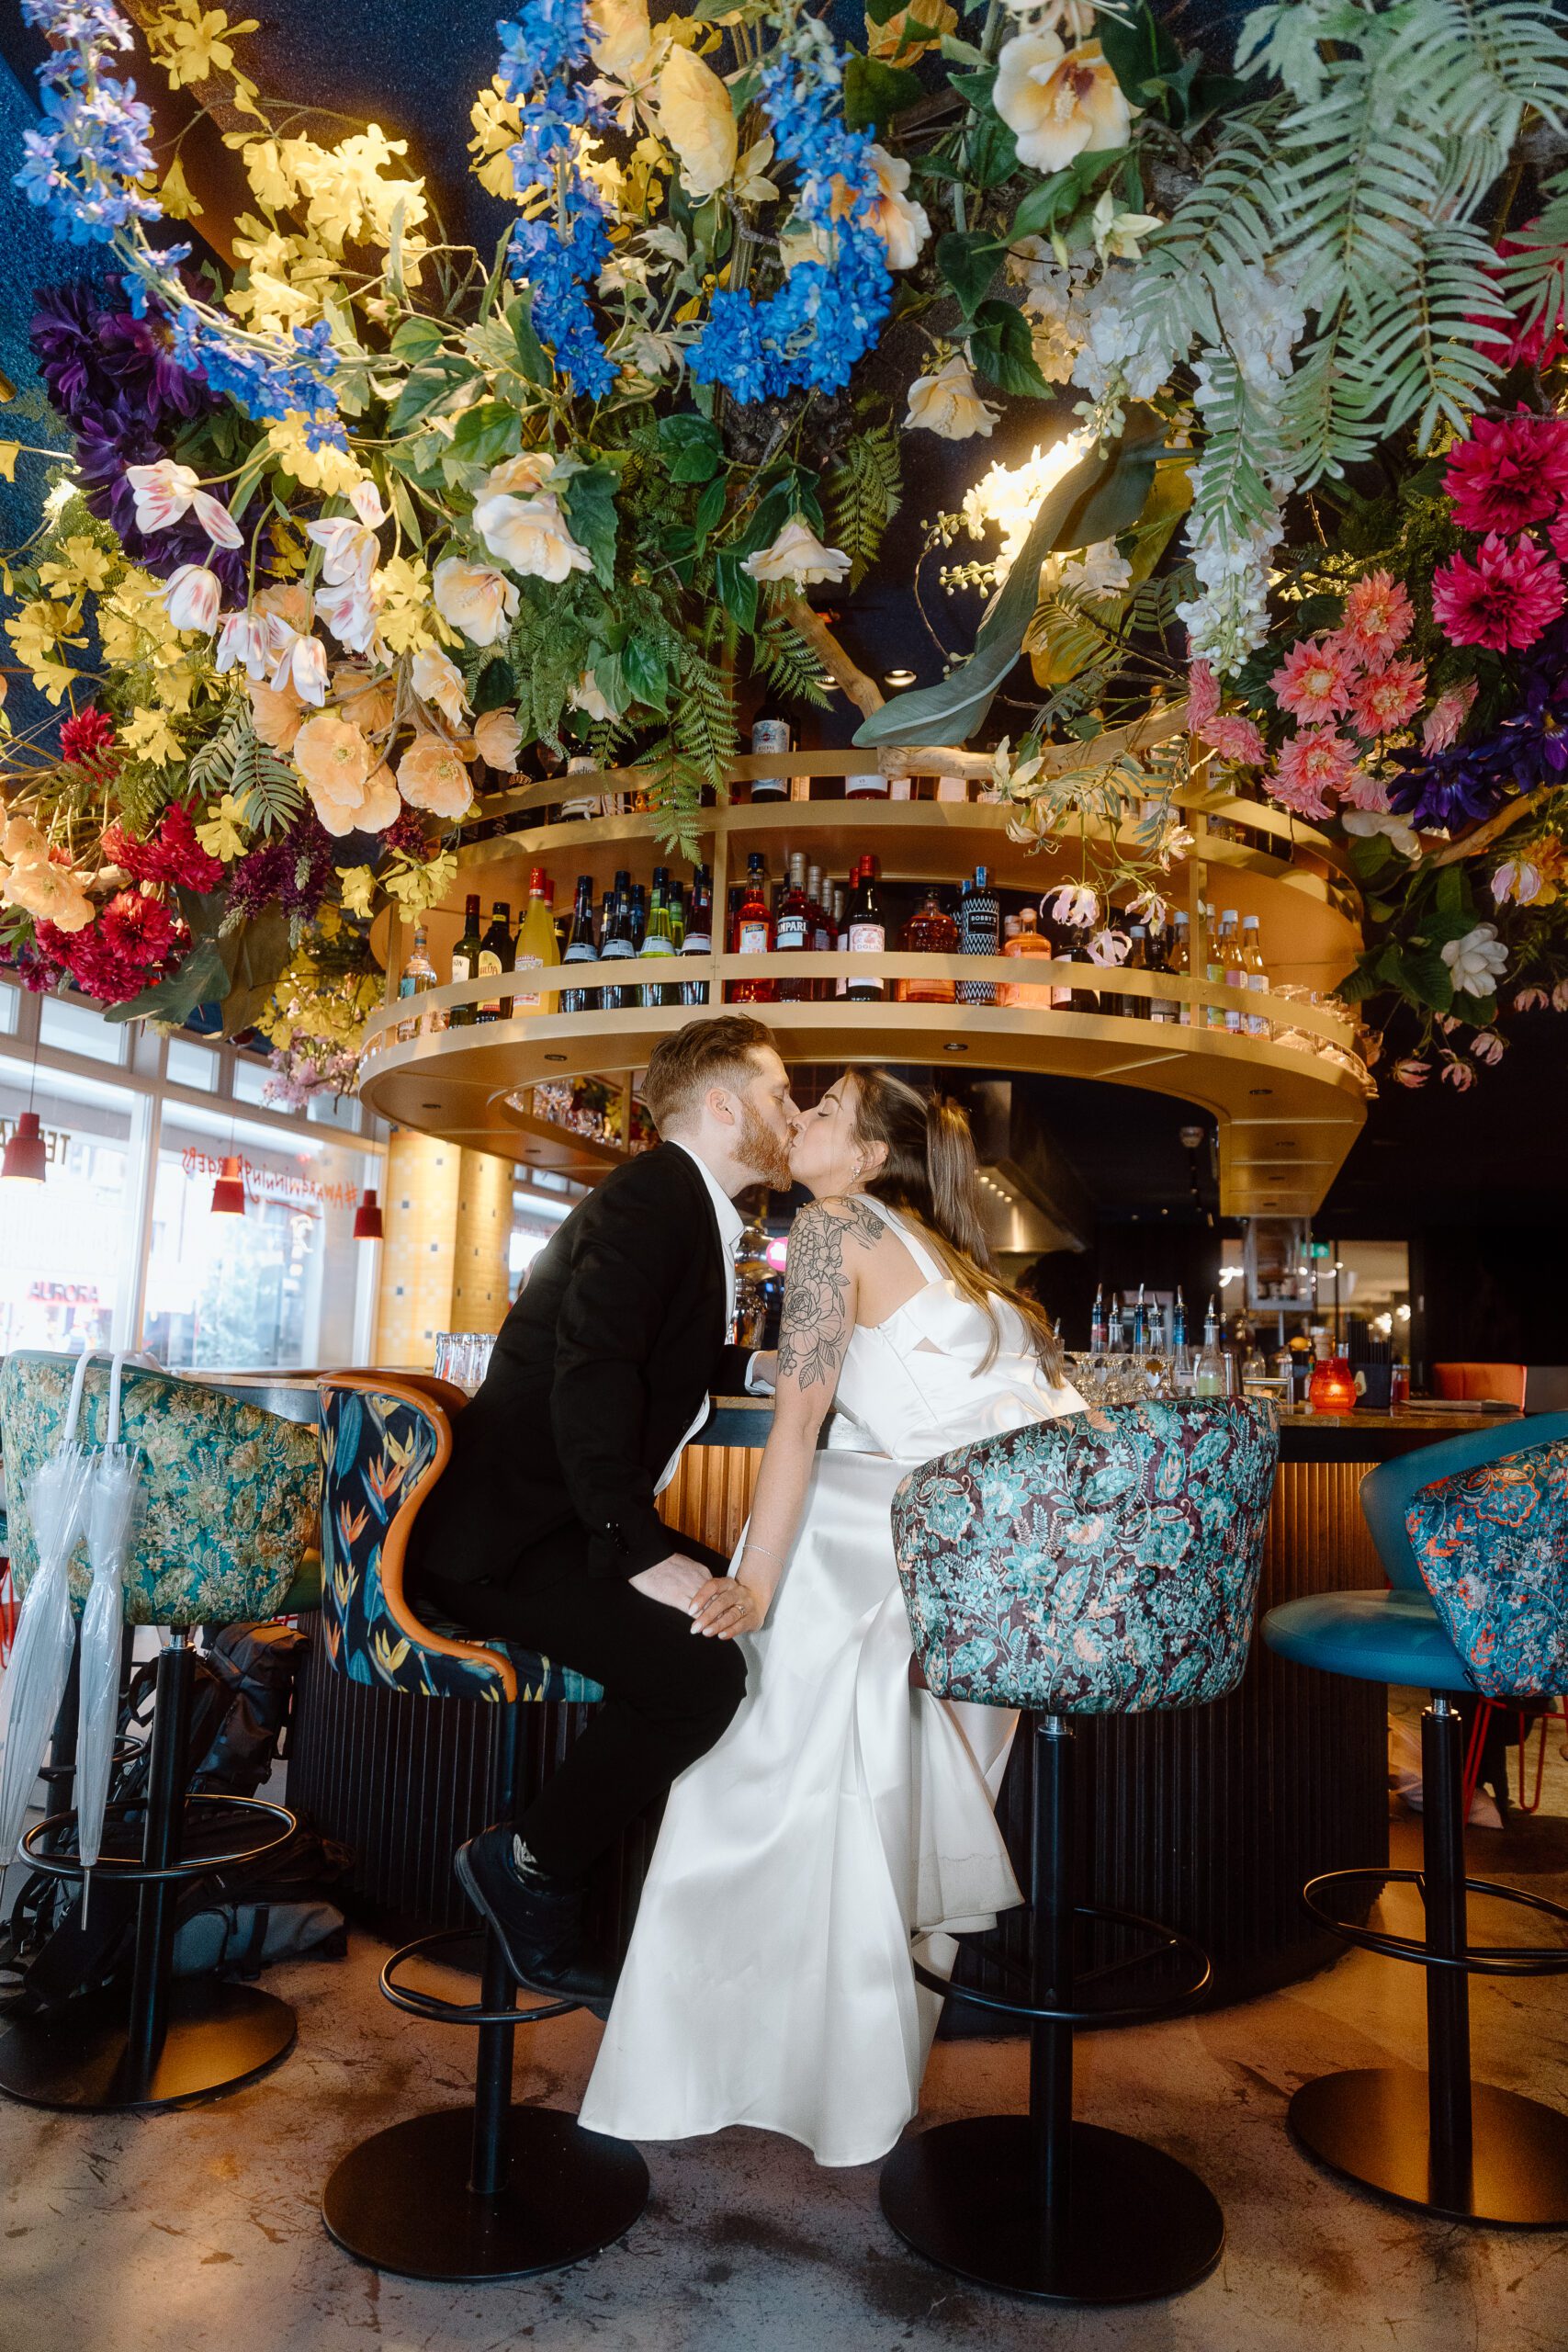 A couple in wedding attire shares a kiss at a bar stool at Ter Marsch & Co in Amsterdam, surrounded by vibrant hanging flowers in a stylish burger bar setting.